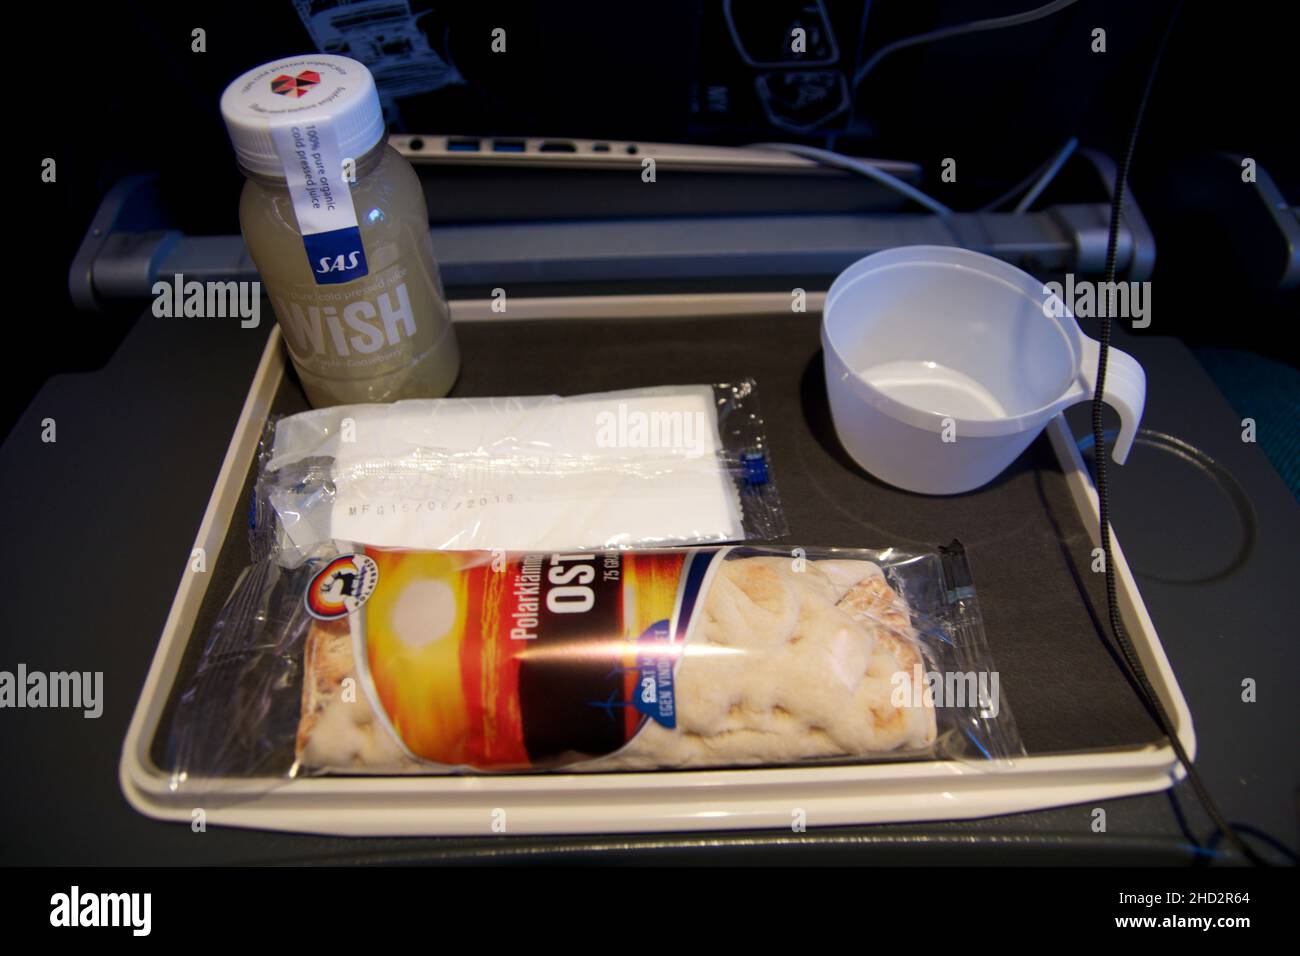 STOCKHOLM, SWEDEN - 24 NOV 2018: Inflight snack on an economy class flight. Plane meal consisting of smoothie and wrap Stock Photo